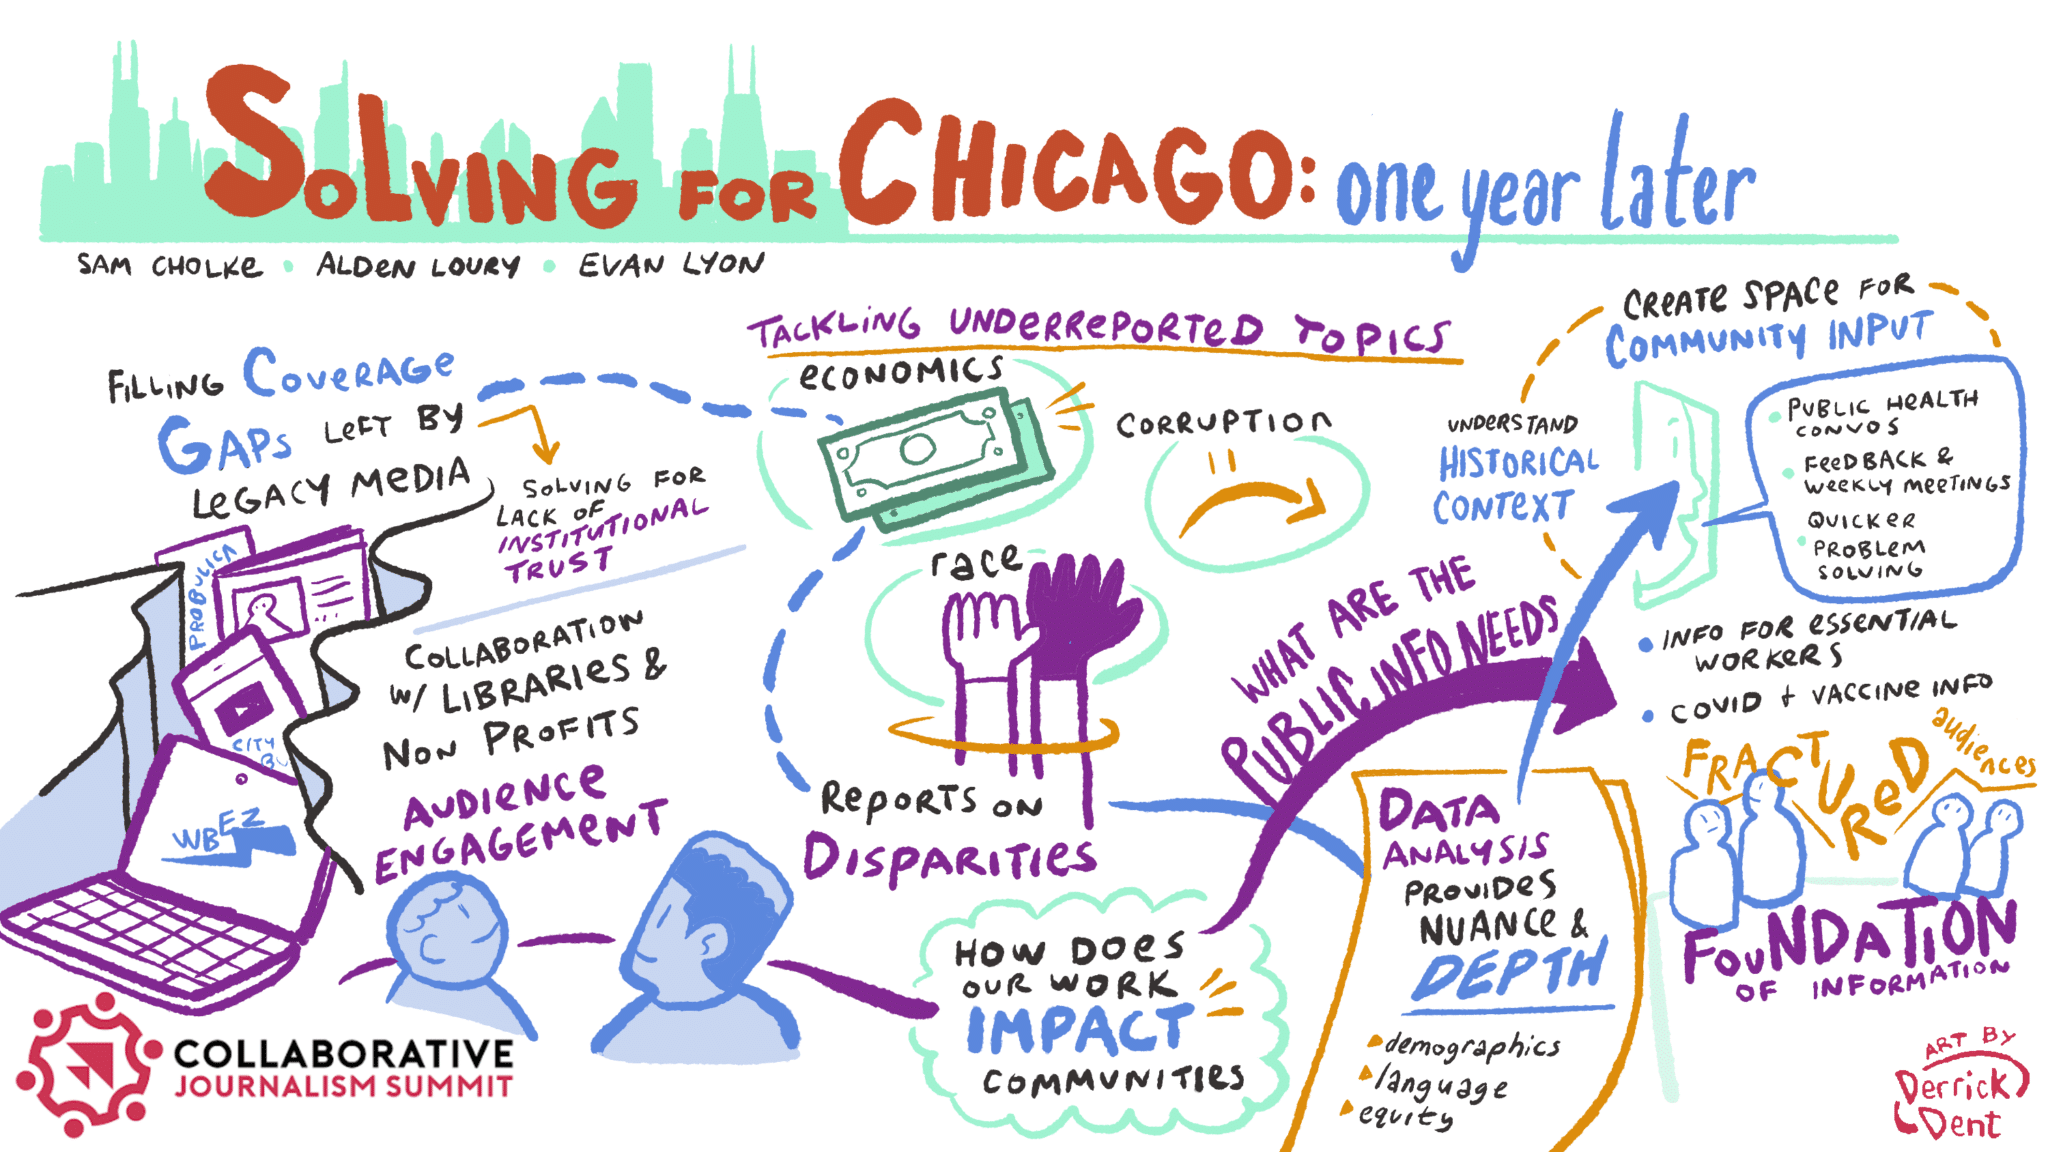 A graphic illustration from a discussion about collaborative journalism and Solving Chicago features cartoon drawings of people working together surrounded by relevant words and concepts from the discussion